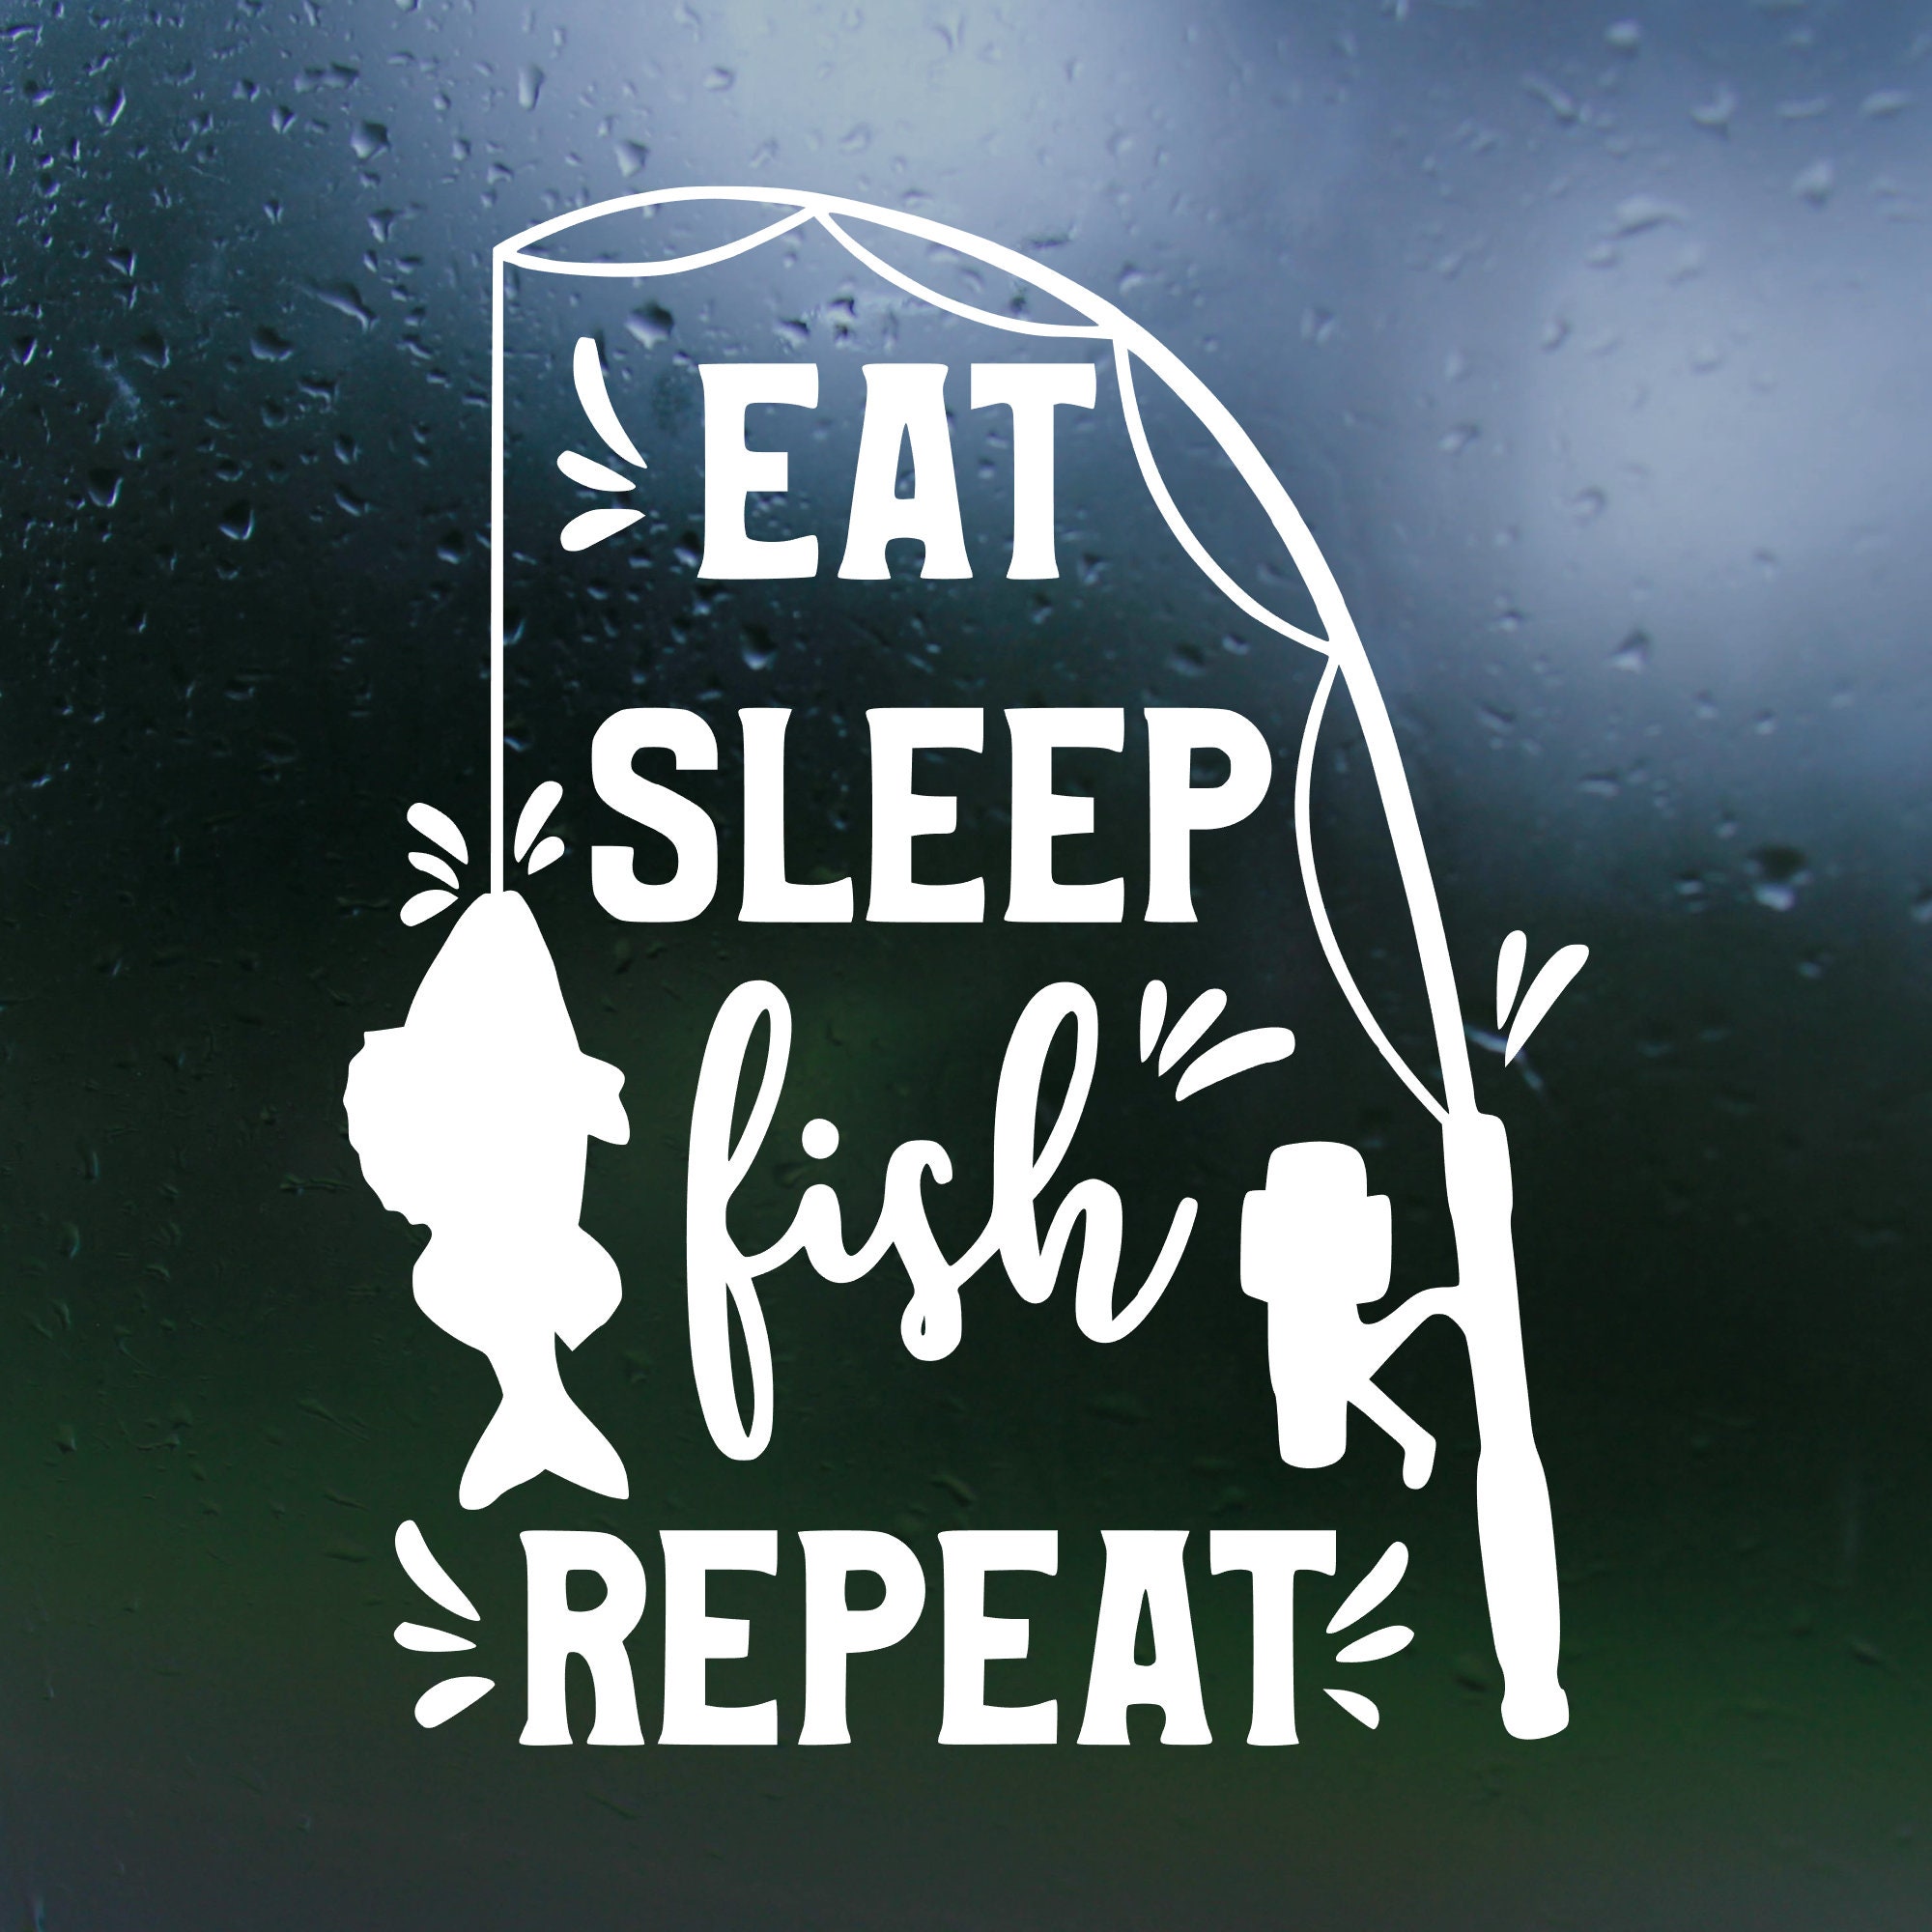 Dye Cut Vinyl Decal eat Sleep Fish Repeat Truck Decal, Laptop Decal, Car  Decal, Window Decal, Tackle Box Decal 